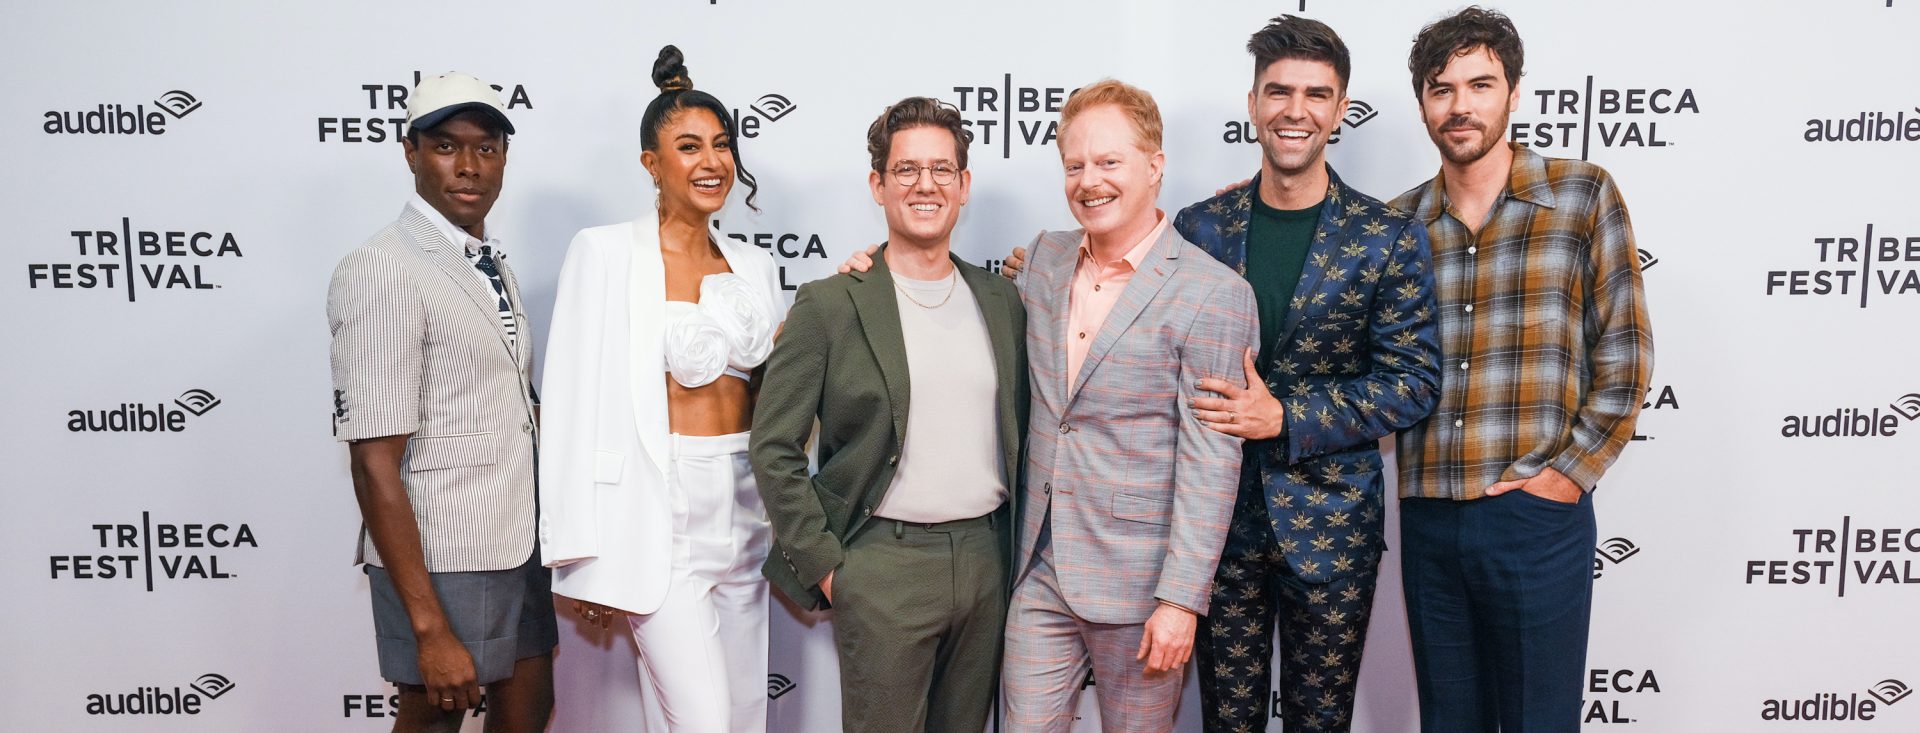 The cast and crew of Gay Pride & Prejudice (L-R Ronald Peet, Vella Lovell, Zackary Grady, Jesse Tyler Ferguson, Justin Mikita, Blake Lee) on the red carpet ahead of their Tribeca Film Festival Panel: “A Romantic Comedy Event: Gay Pride and Prejudice.”